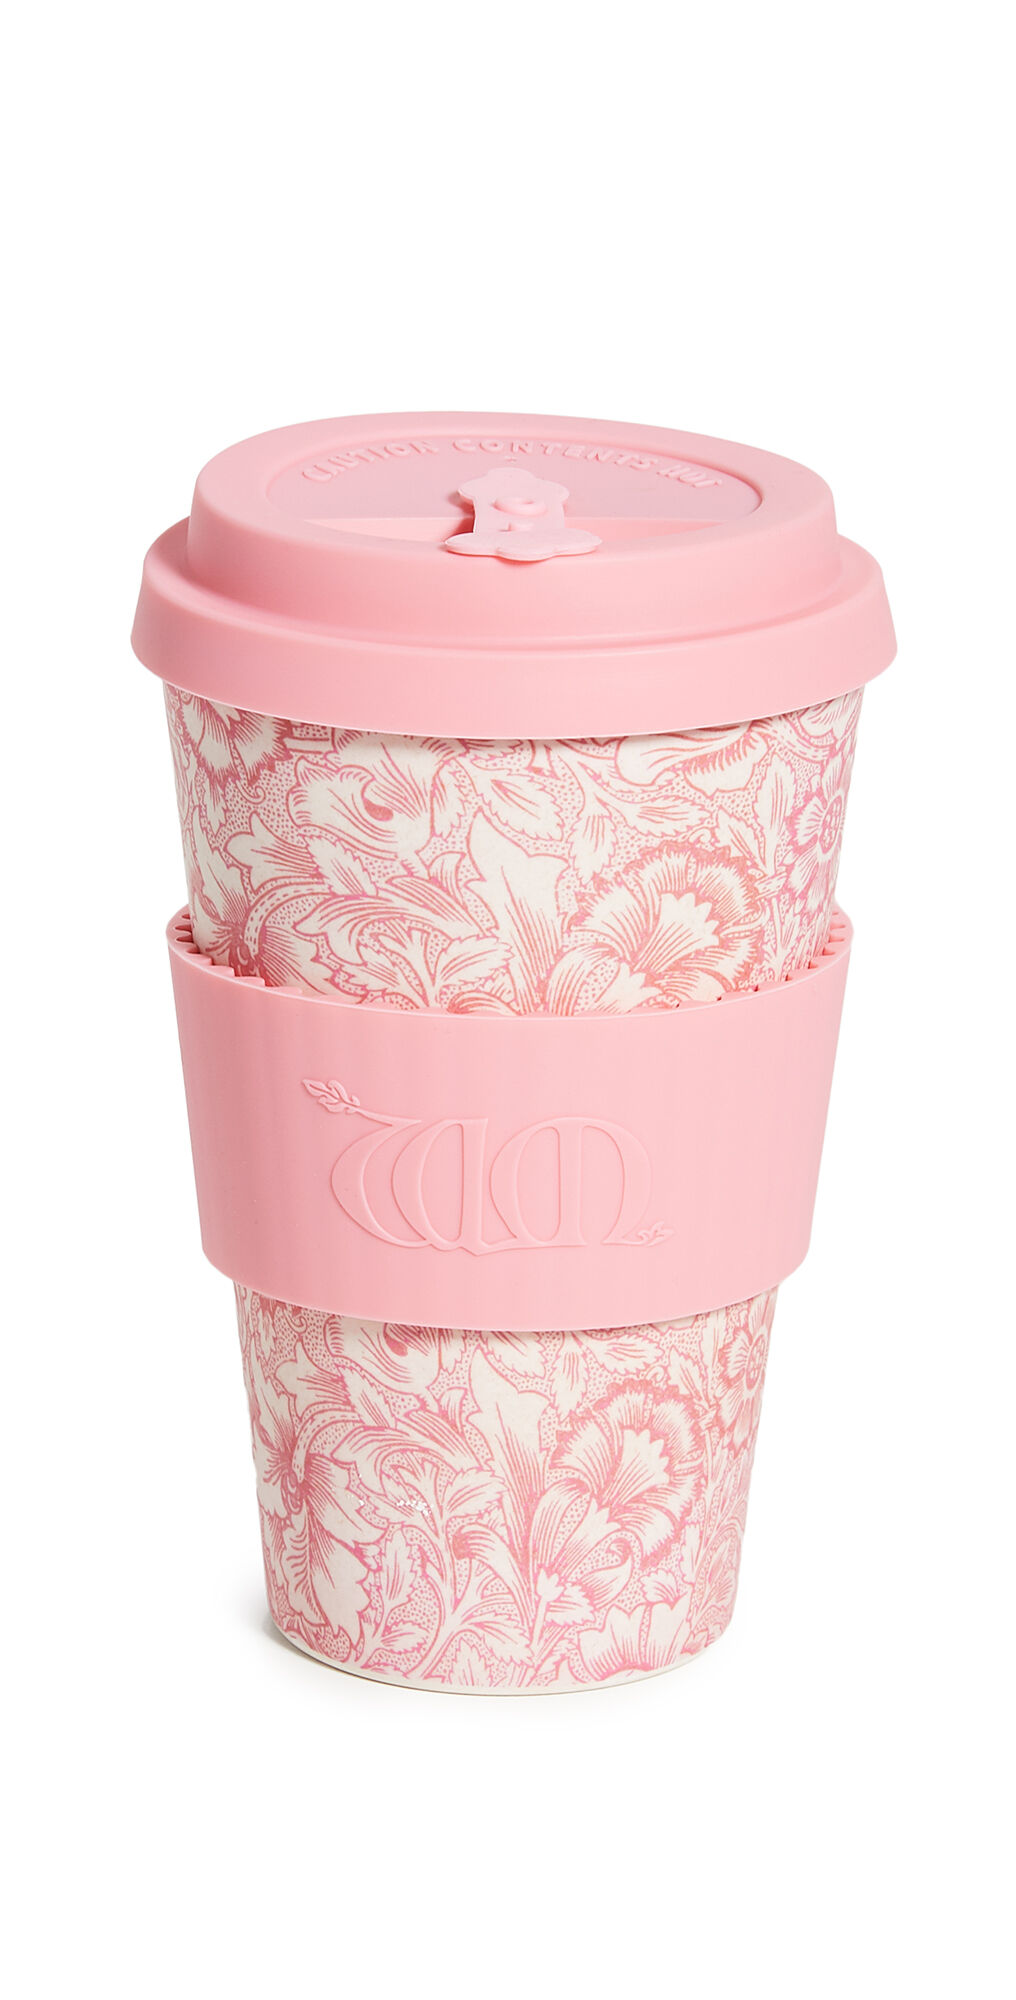 Shopbop Home Shopbop @Home 14oz Reuseable Coffee Cup William Morris Poppy One Size  William Morris Poppy  size:One Size